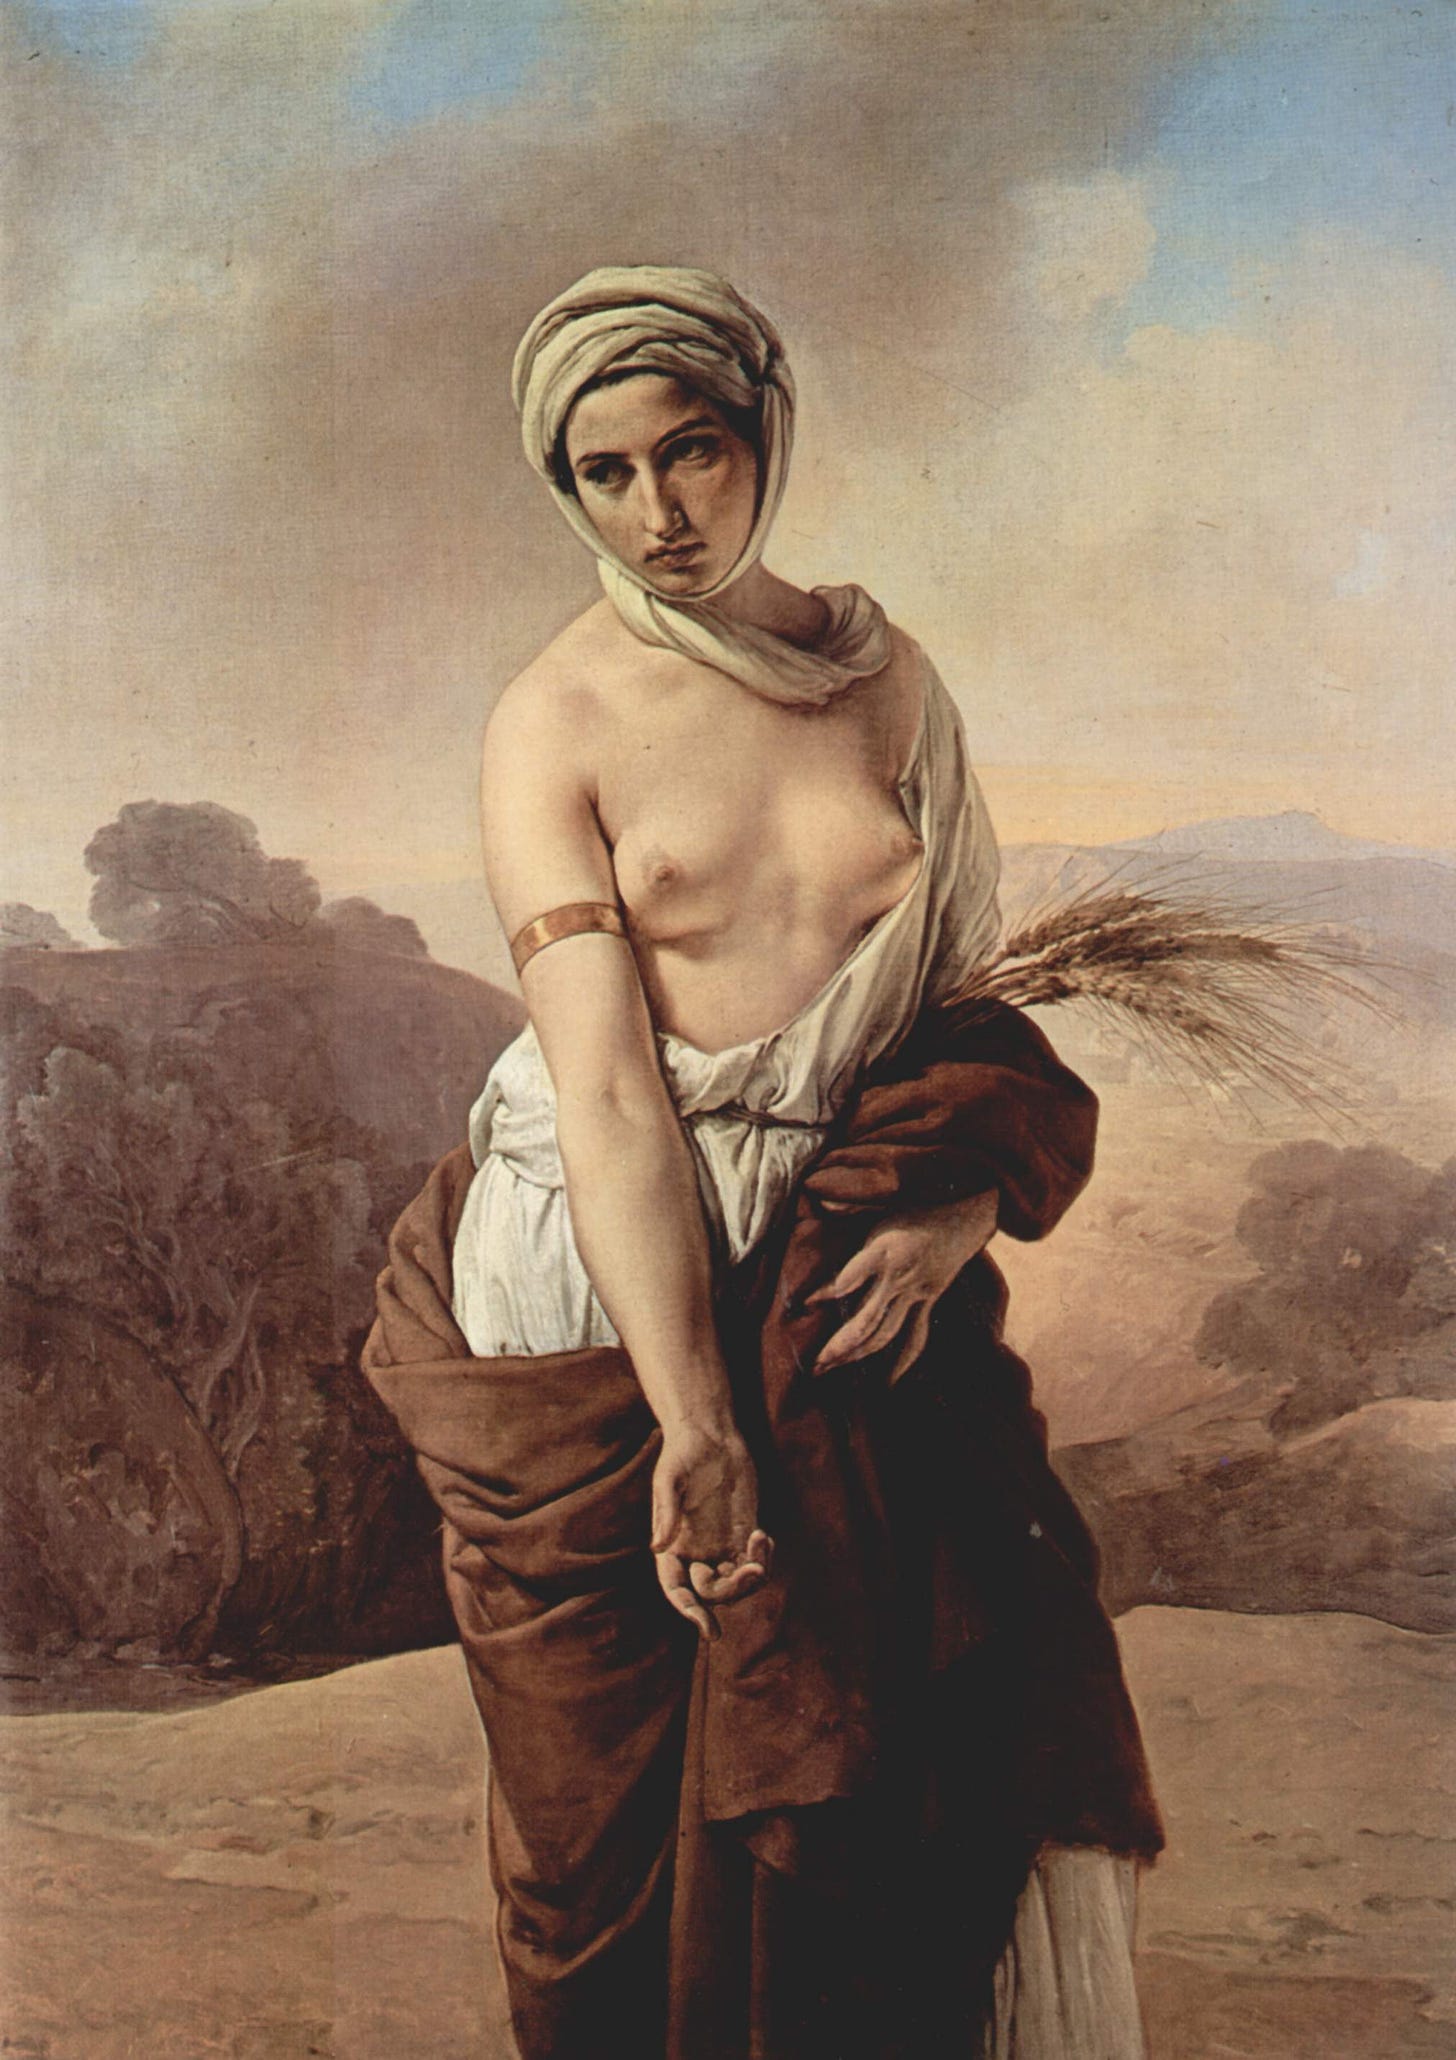 A painting of a young, white woman in a white veil stands here with her white dress pulled down to her waist, exposing her breasts, She is holding a brown blanket around her. It is a seductive take on Ruth from the Bible